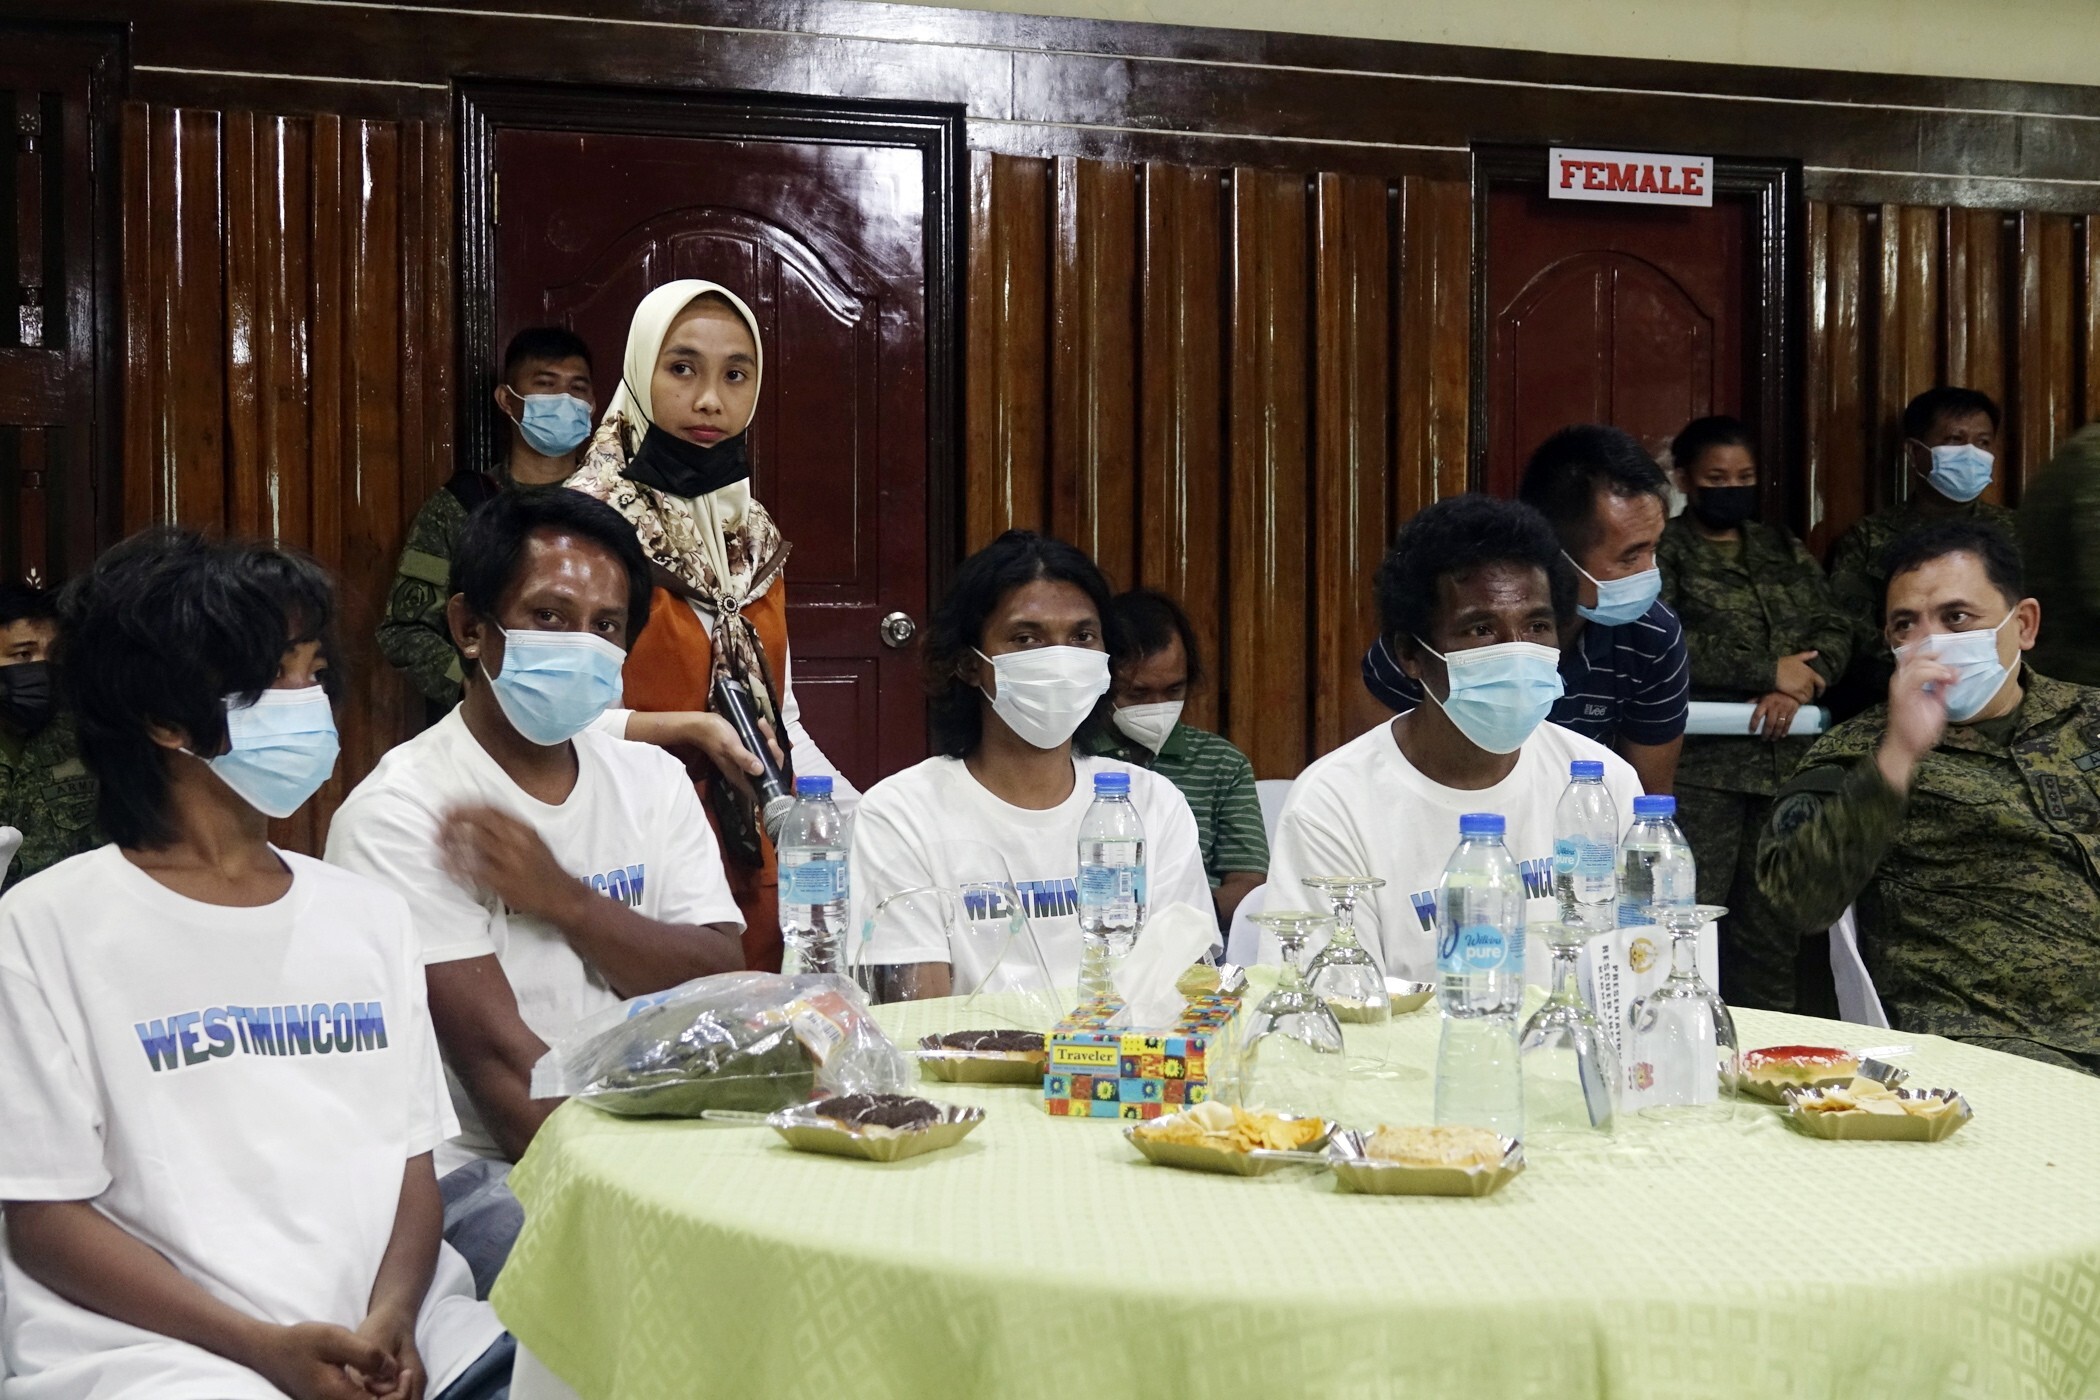 The kidnap victims attend a press conference at Western Mindanao Command headquarters in Zamboanga City, southern Philippines, on Sunday. Photo: EPA